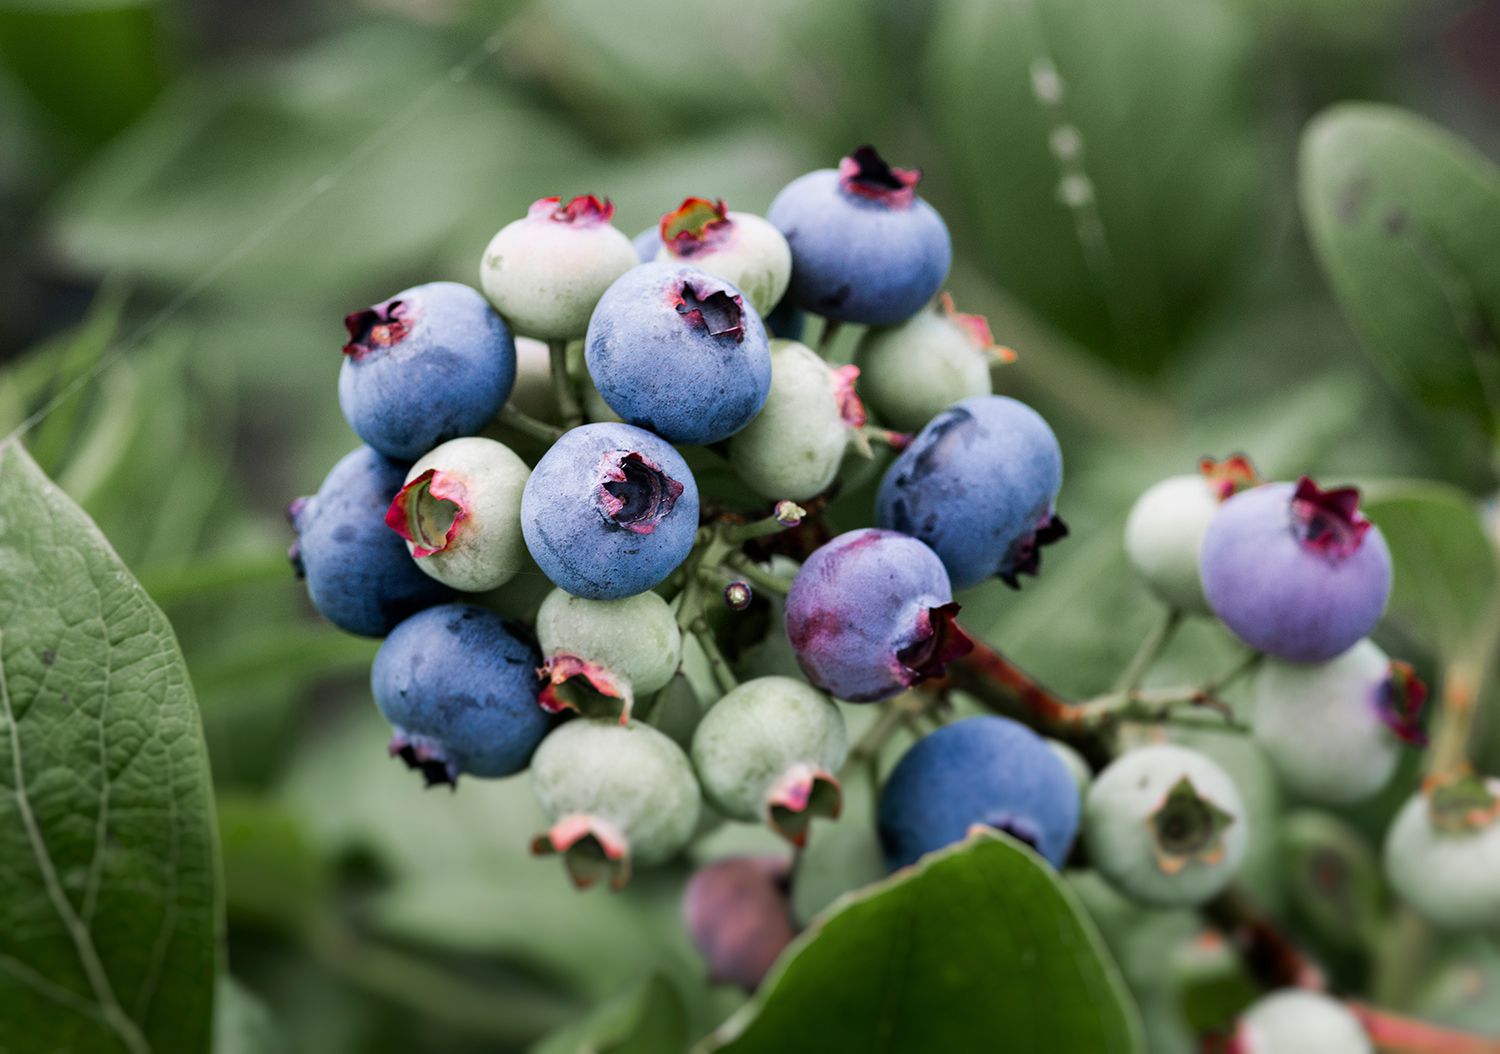 How To Plant A Blueberry Bush